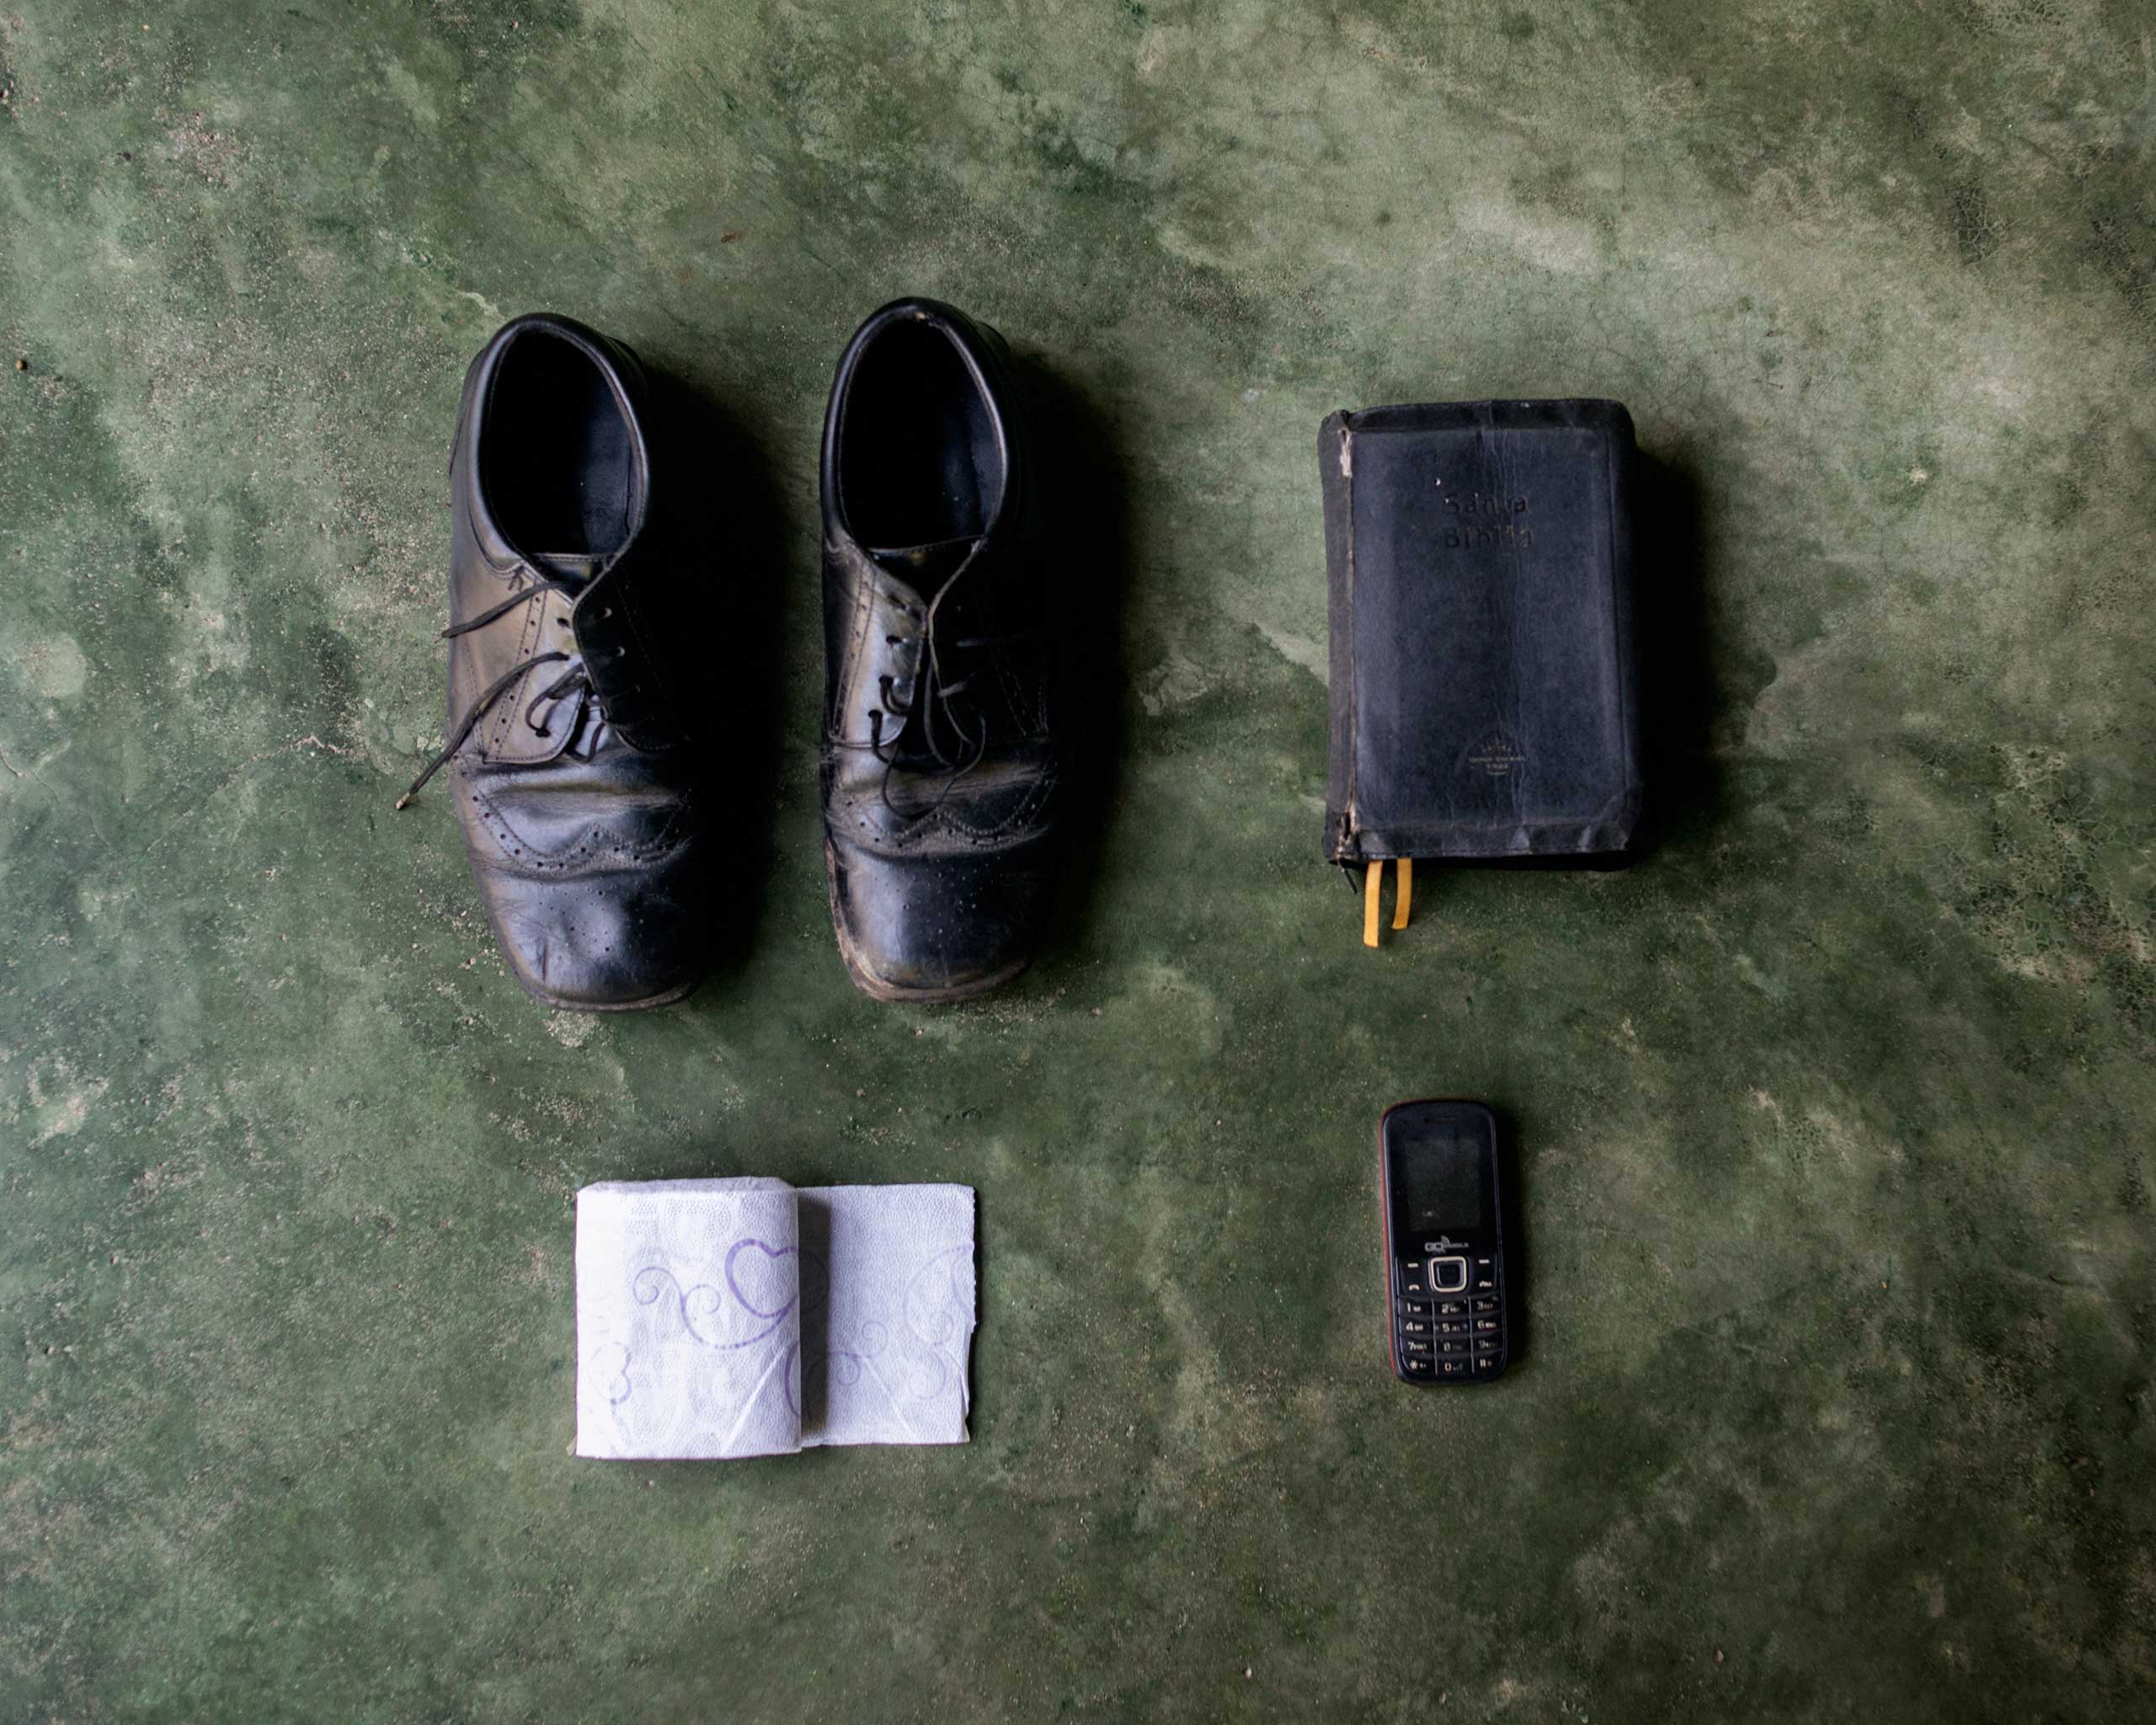 Alfredo Núñez, 46, from El Salvador. He wants to go to the U.S. but he thinks it would be okay if he can reach the north of Mexico and find a job there. In his bag, he has a pair of shoes, a bible, toilet paper and a cell phone.